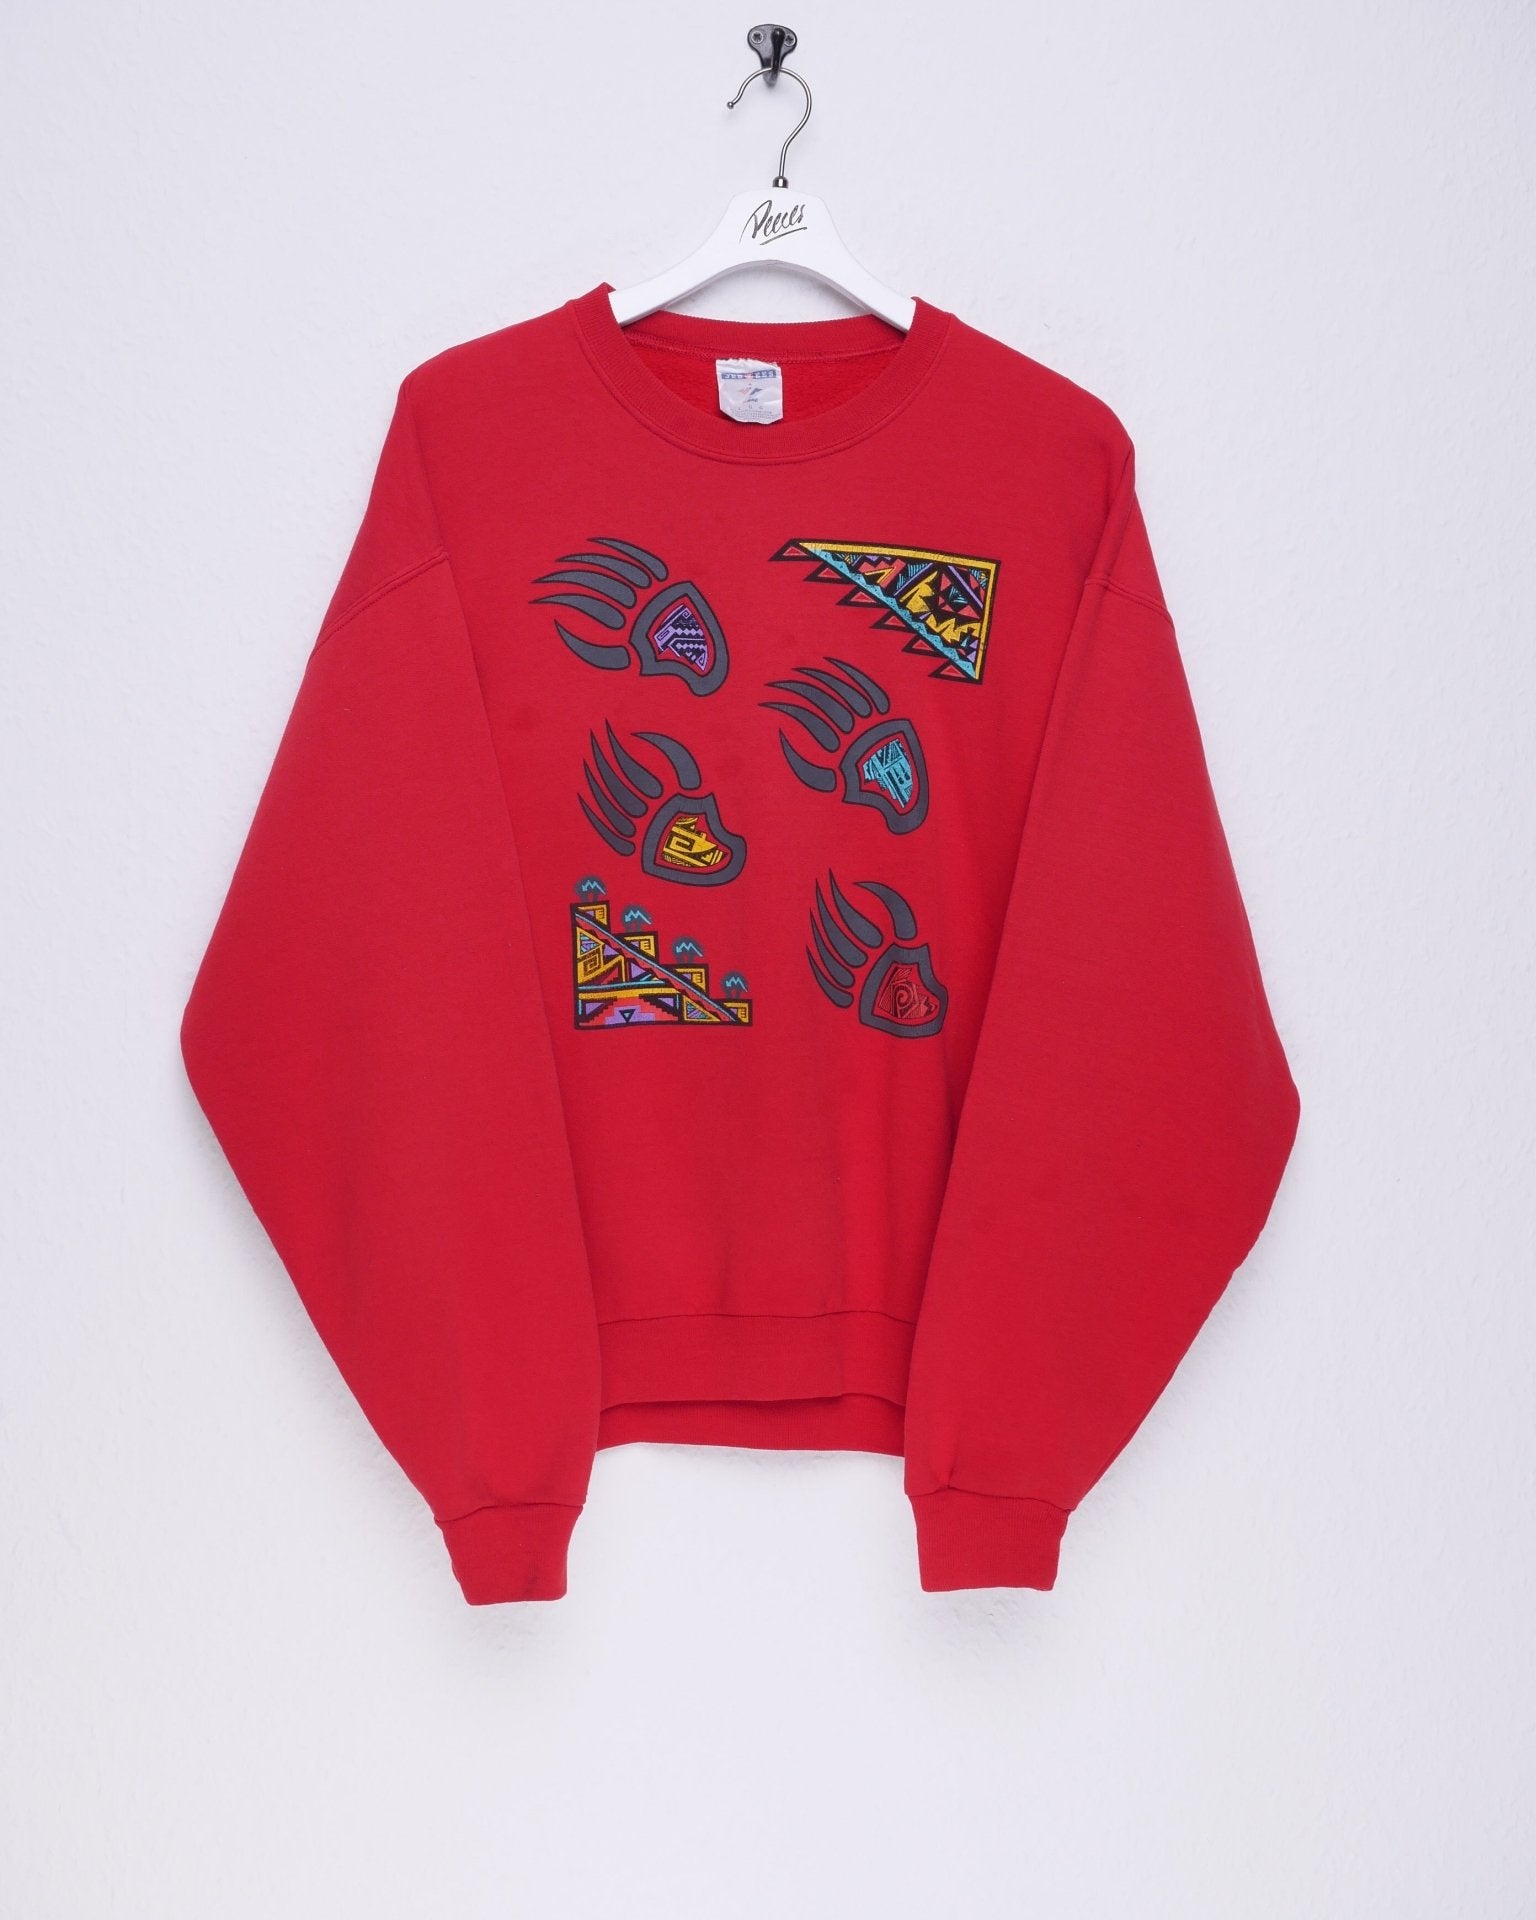 Vintage printed red oversized Sweater - Peeces